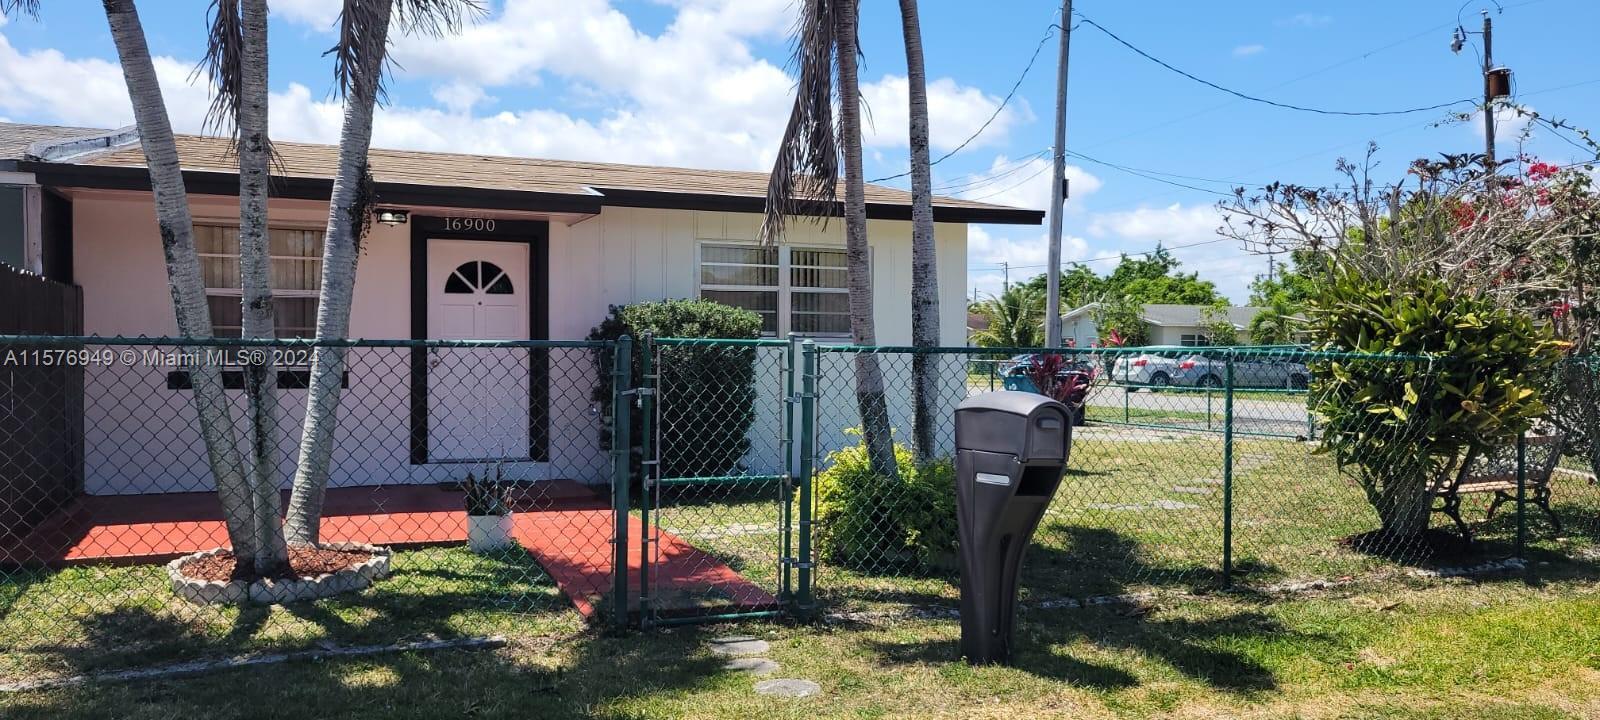 Beautiful, remodeled twin home in the sought Palmetto Bay area. This home features 3 bedrooms and 2 